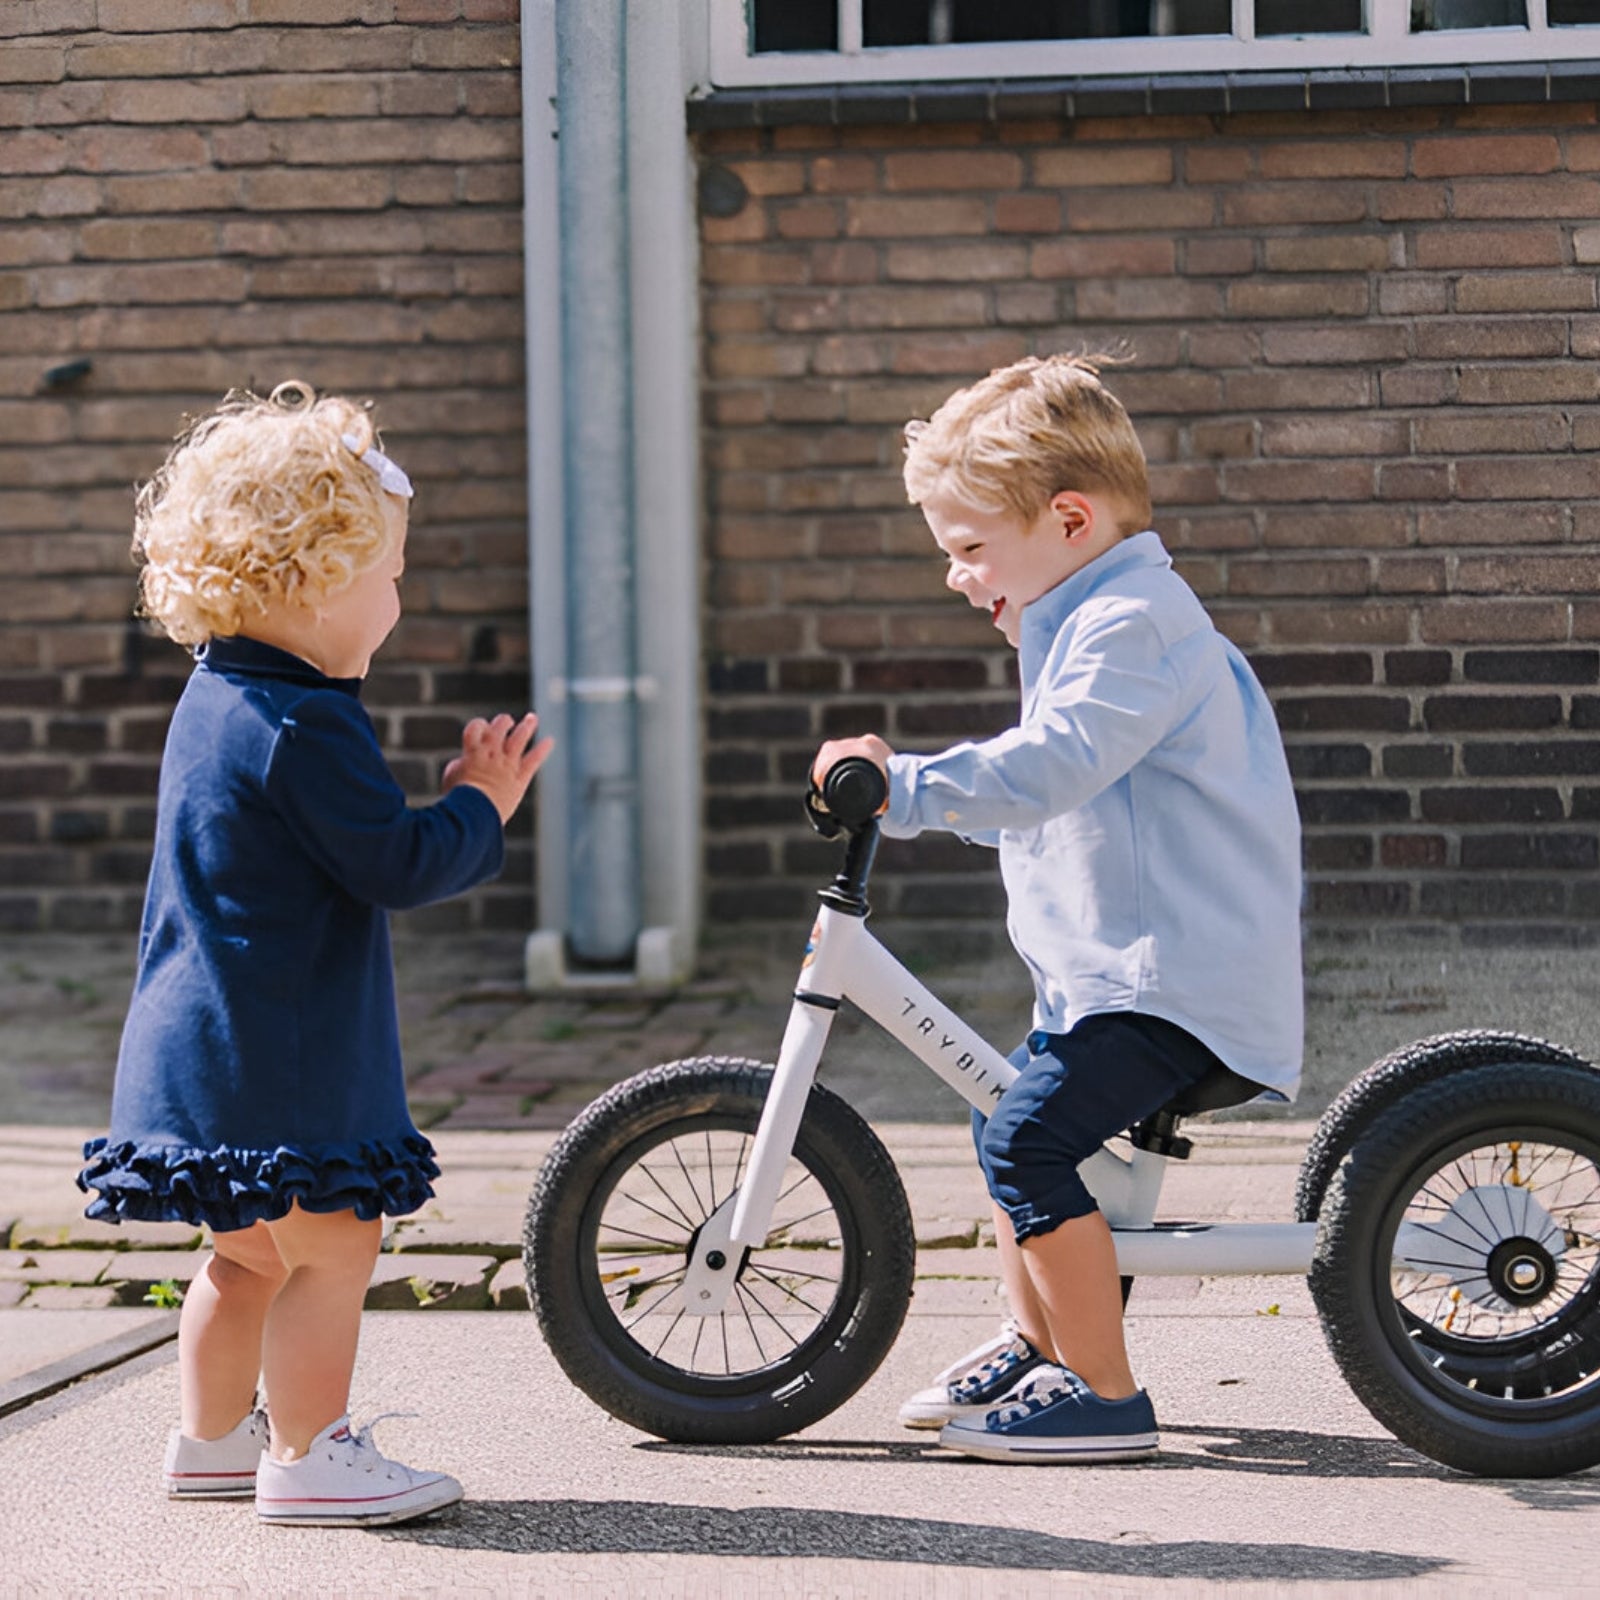 Child learning to ride on a White Trybike balance bike in urban setting.